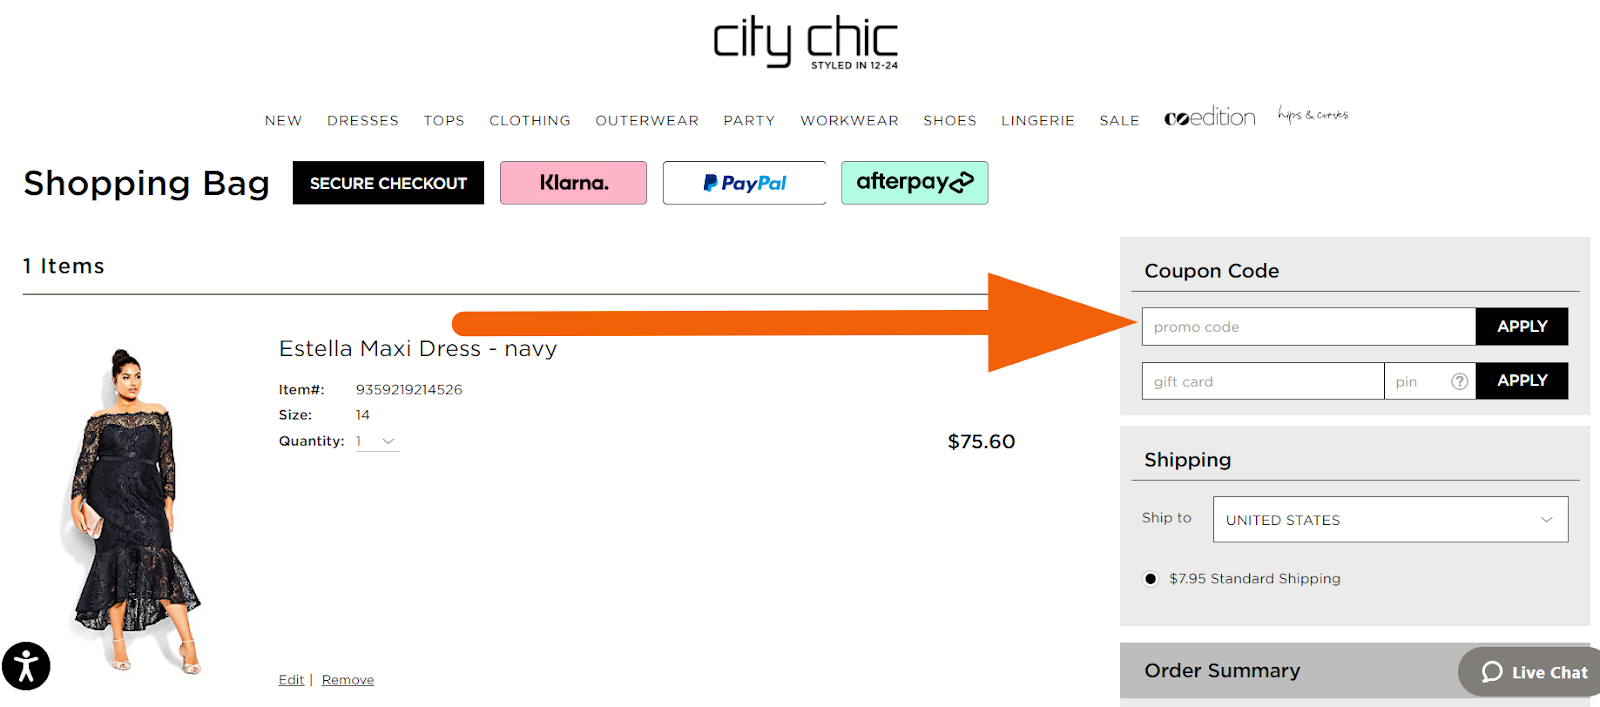 city chic us coupon code